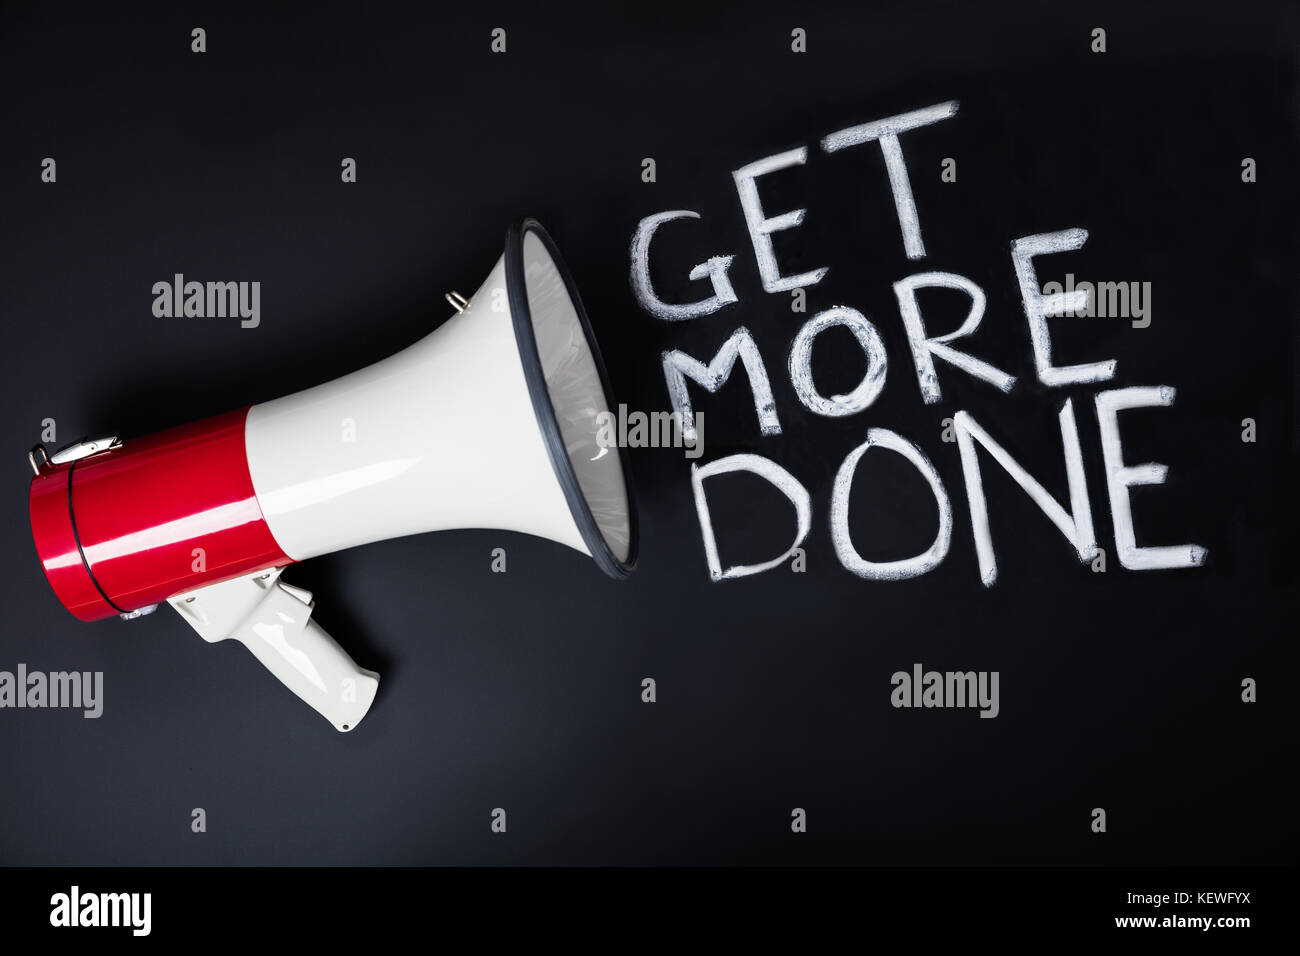 An Announcement For Get More Done Using Megaphone On Blackboard Stock Photo